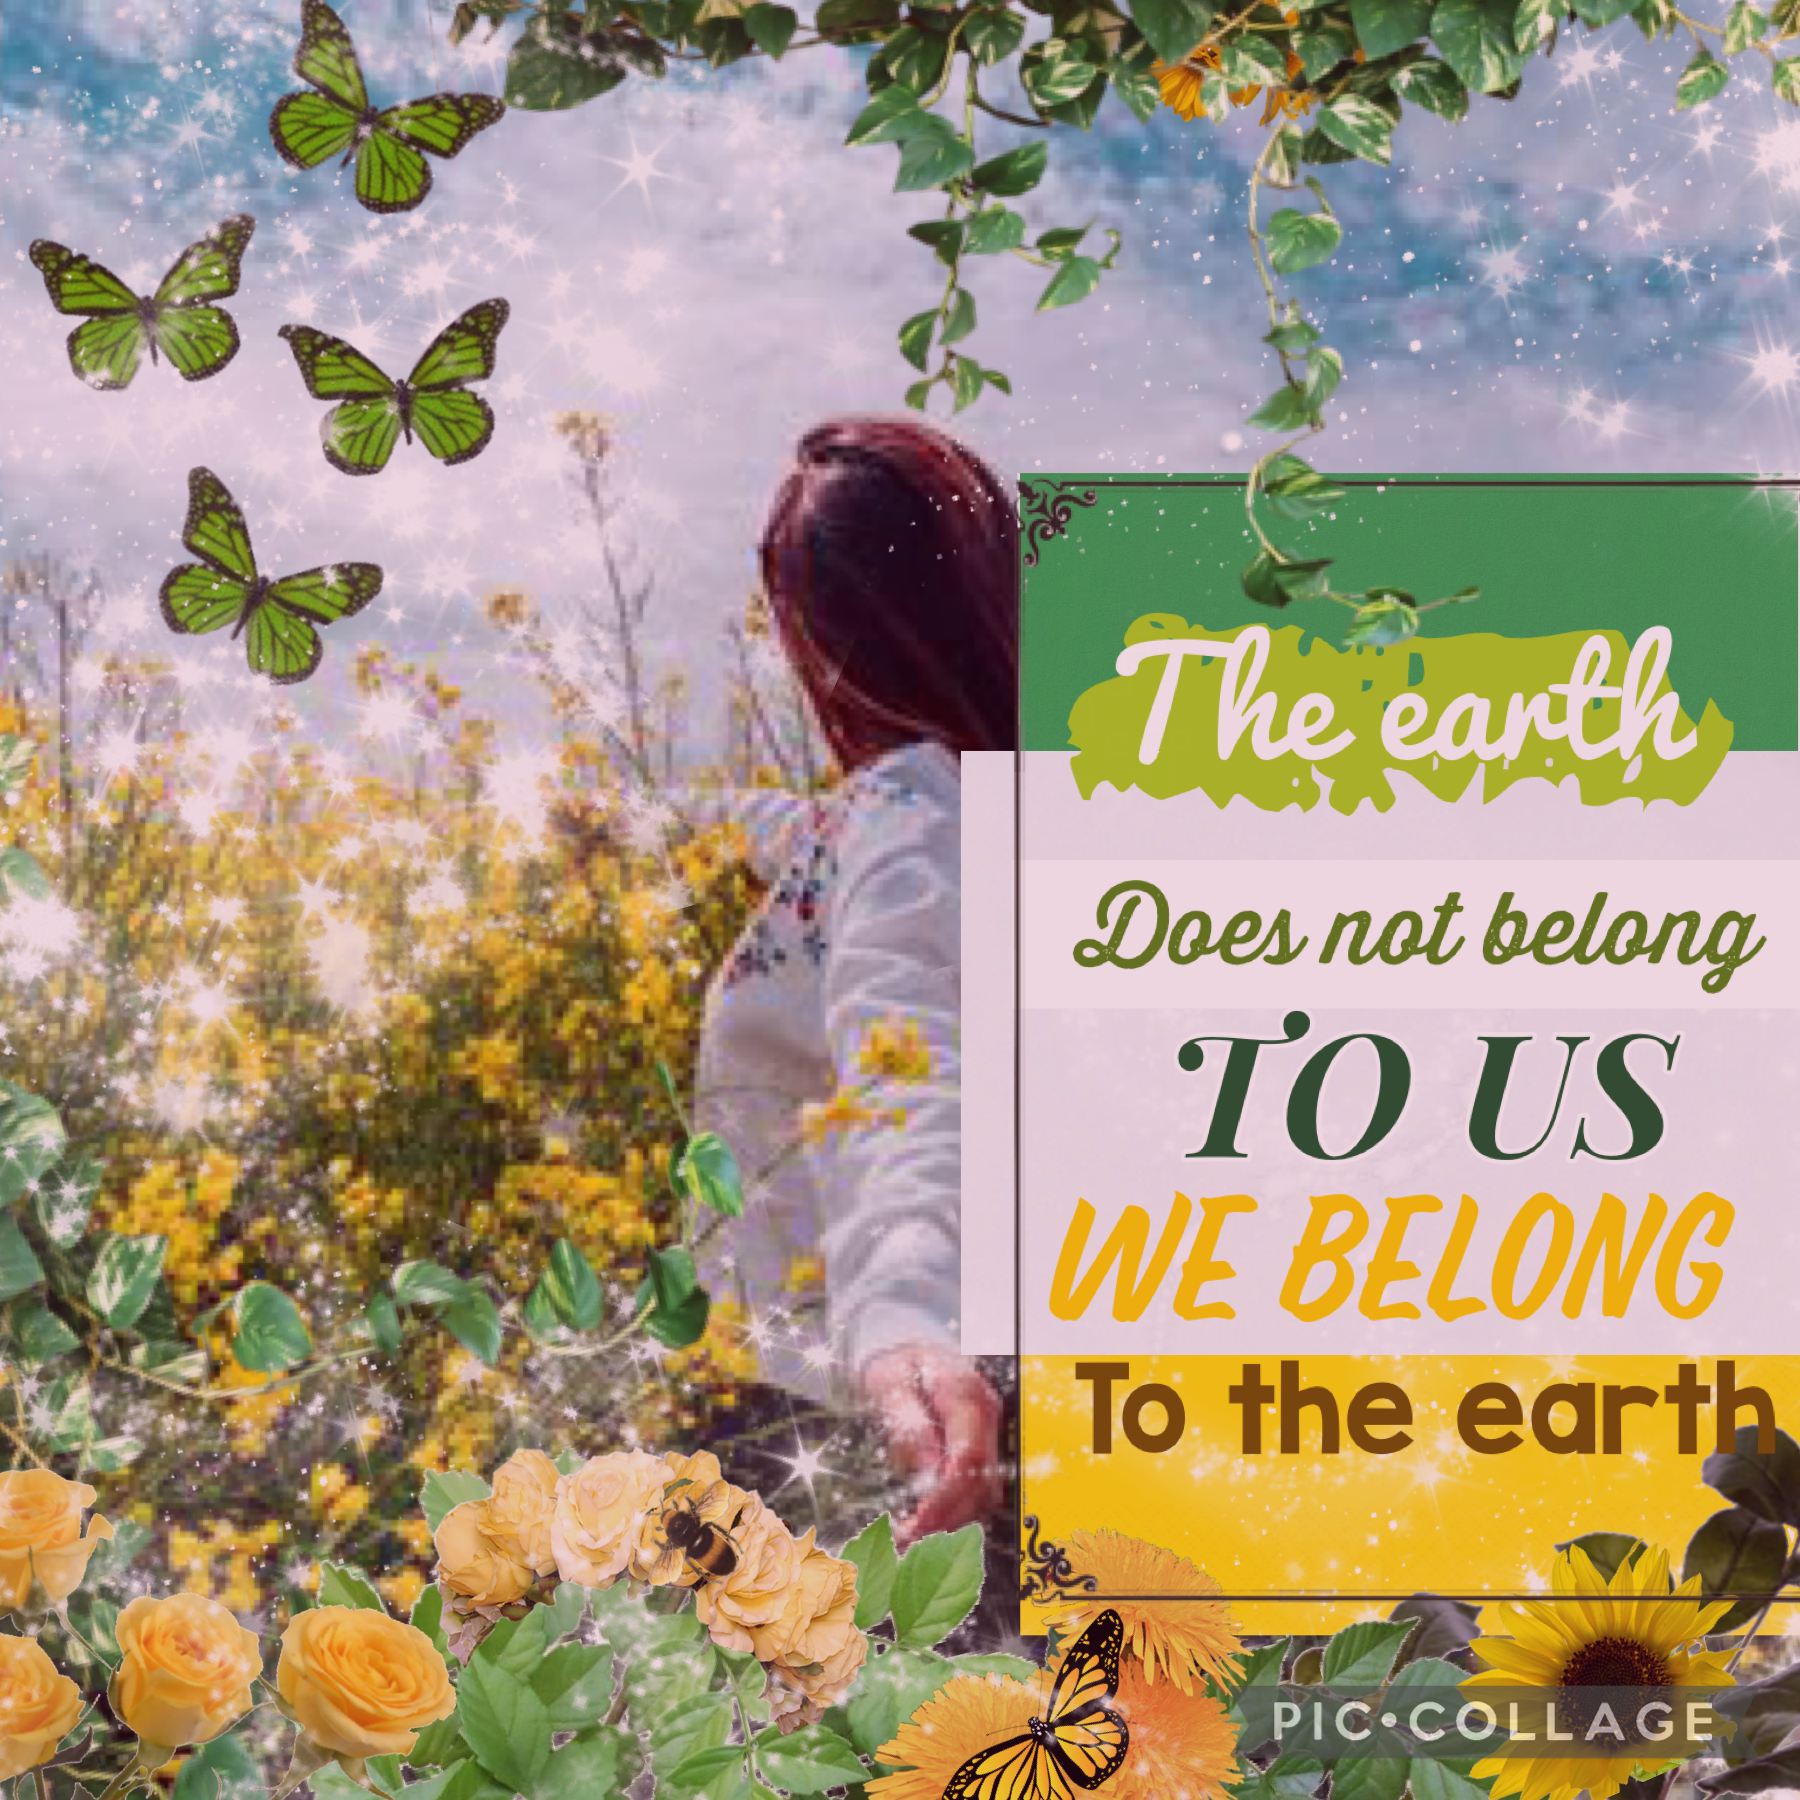 Happy earth day! We belong to earth, so we have to take good care of it. Planting trees, picking up trash, and even turning off the lights when you’re done using them are great ways to take care of earth! 😄🌎🌳